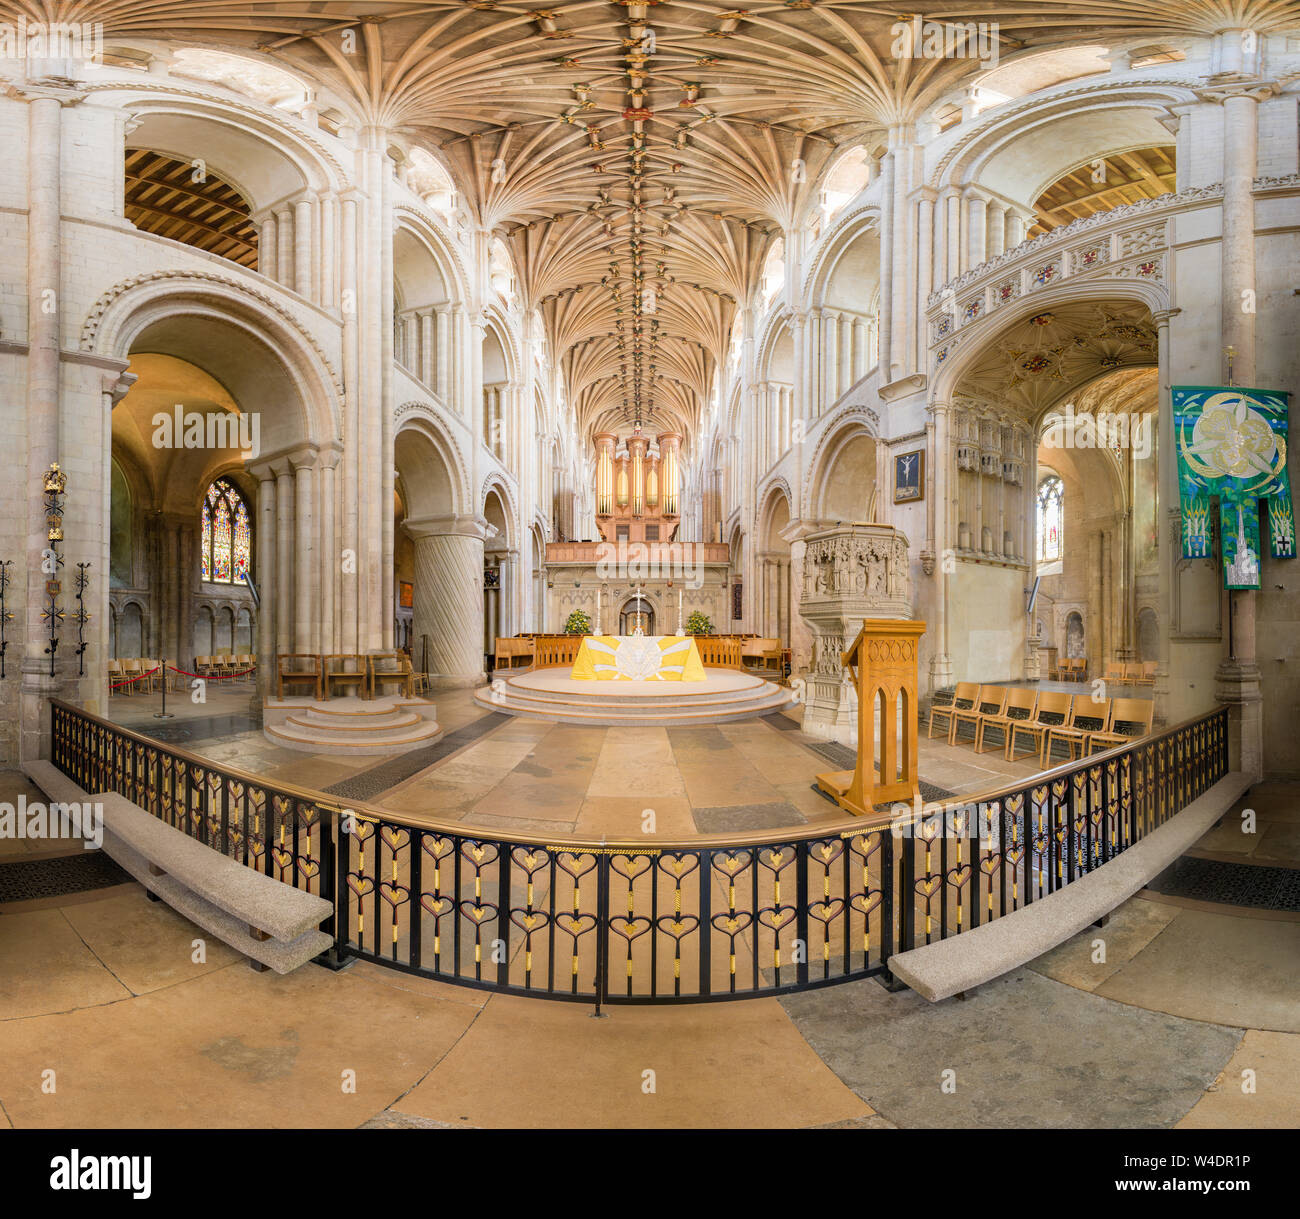 Altar in the nave at the Holy and Undivided Trinity cathedral at Norwich, England. Stock Photo